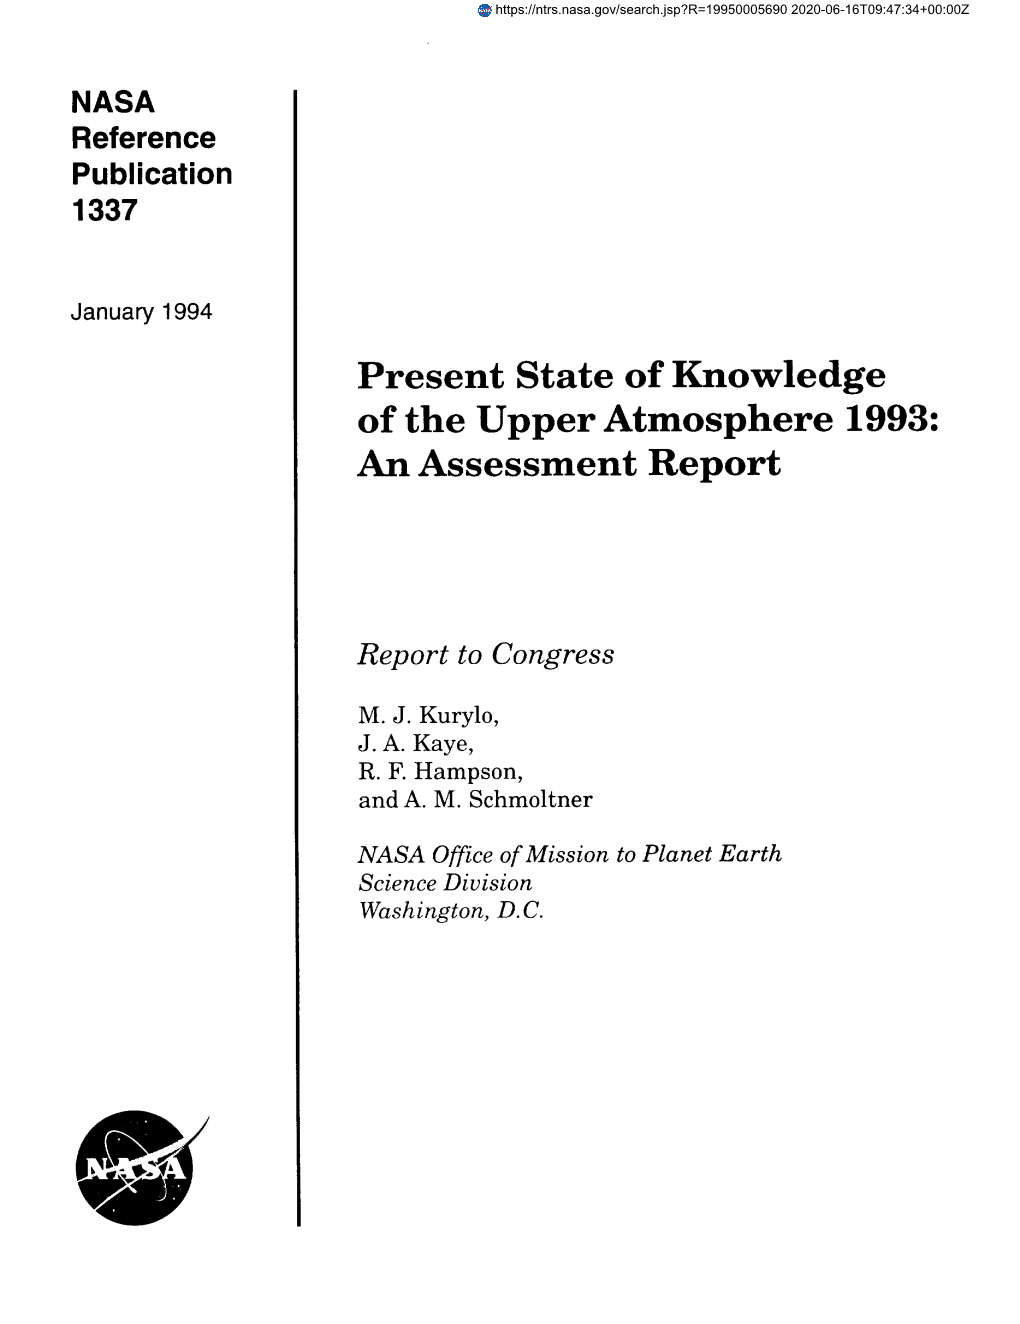 Present State of Knowledge of the Upper Atmosphere 1993: an Assessment Report